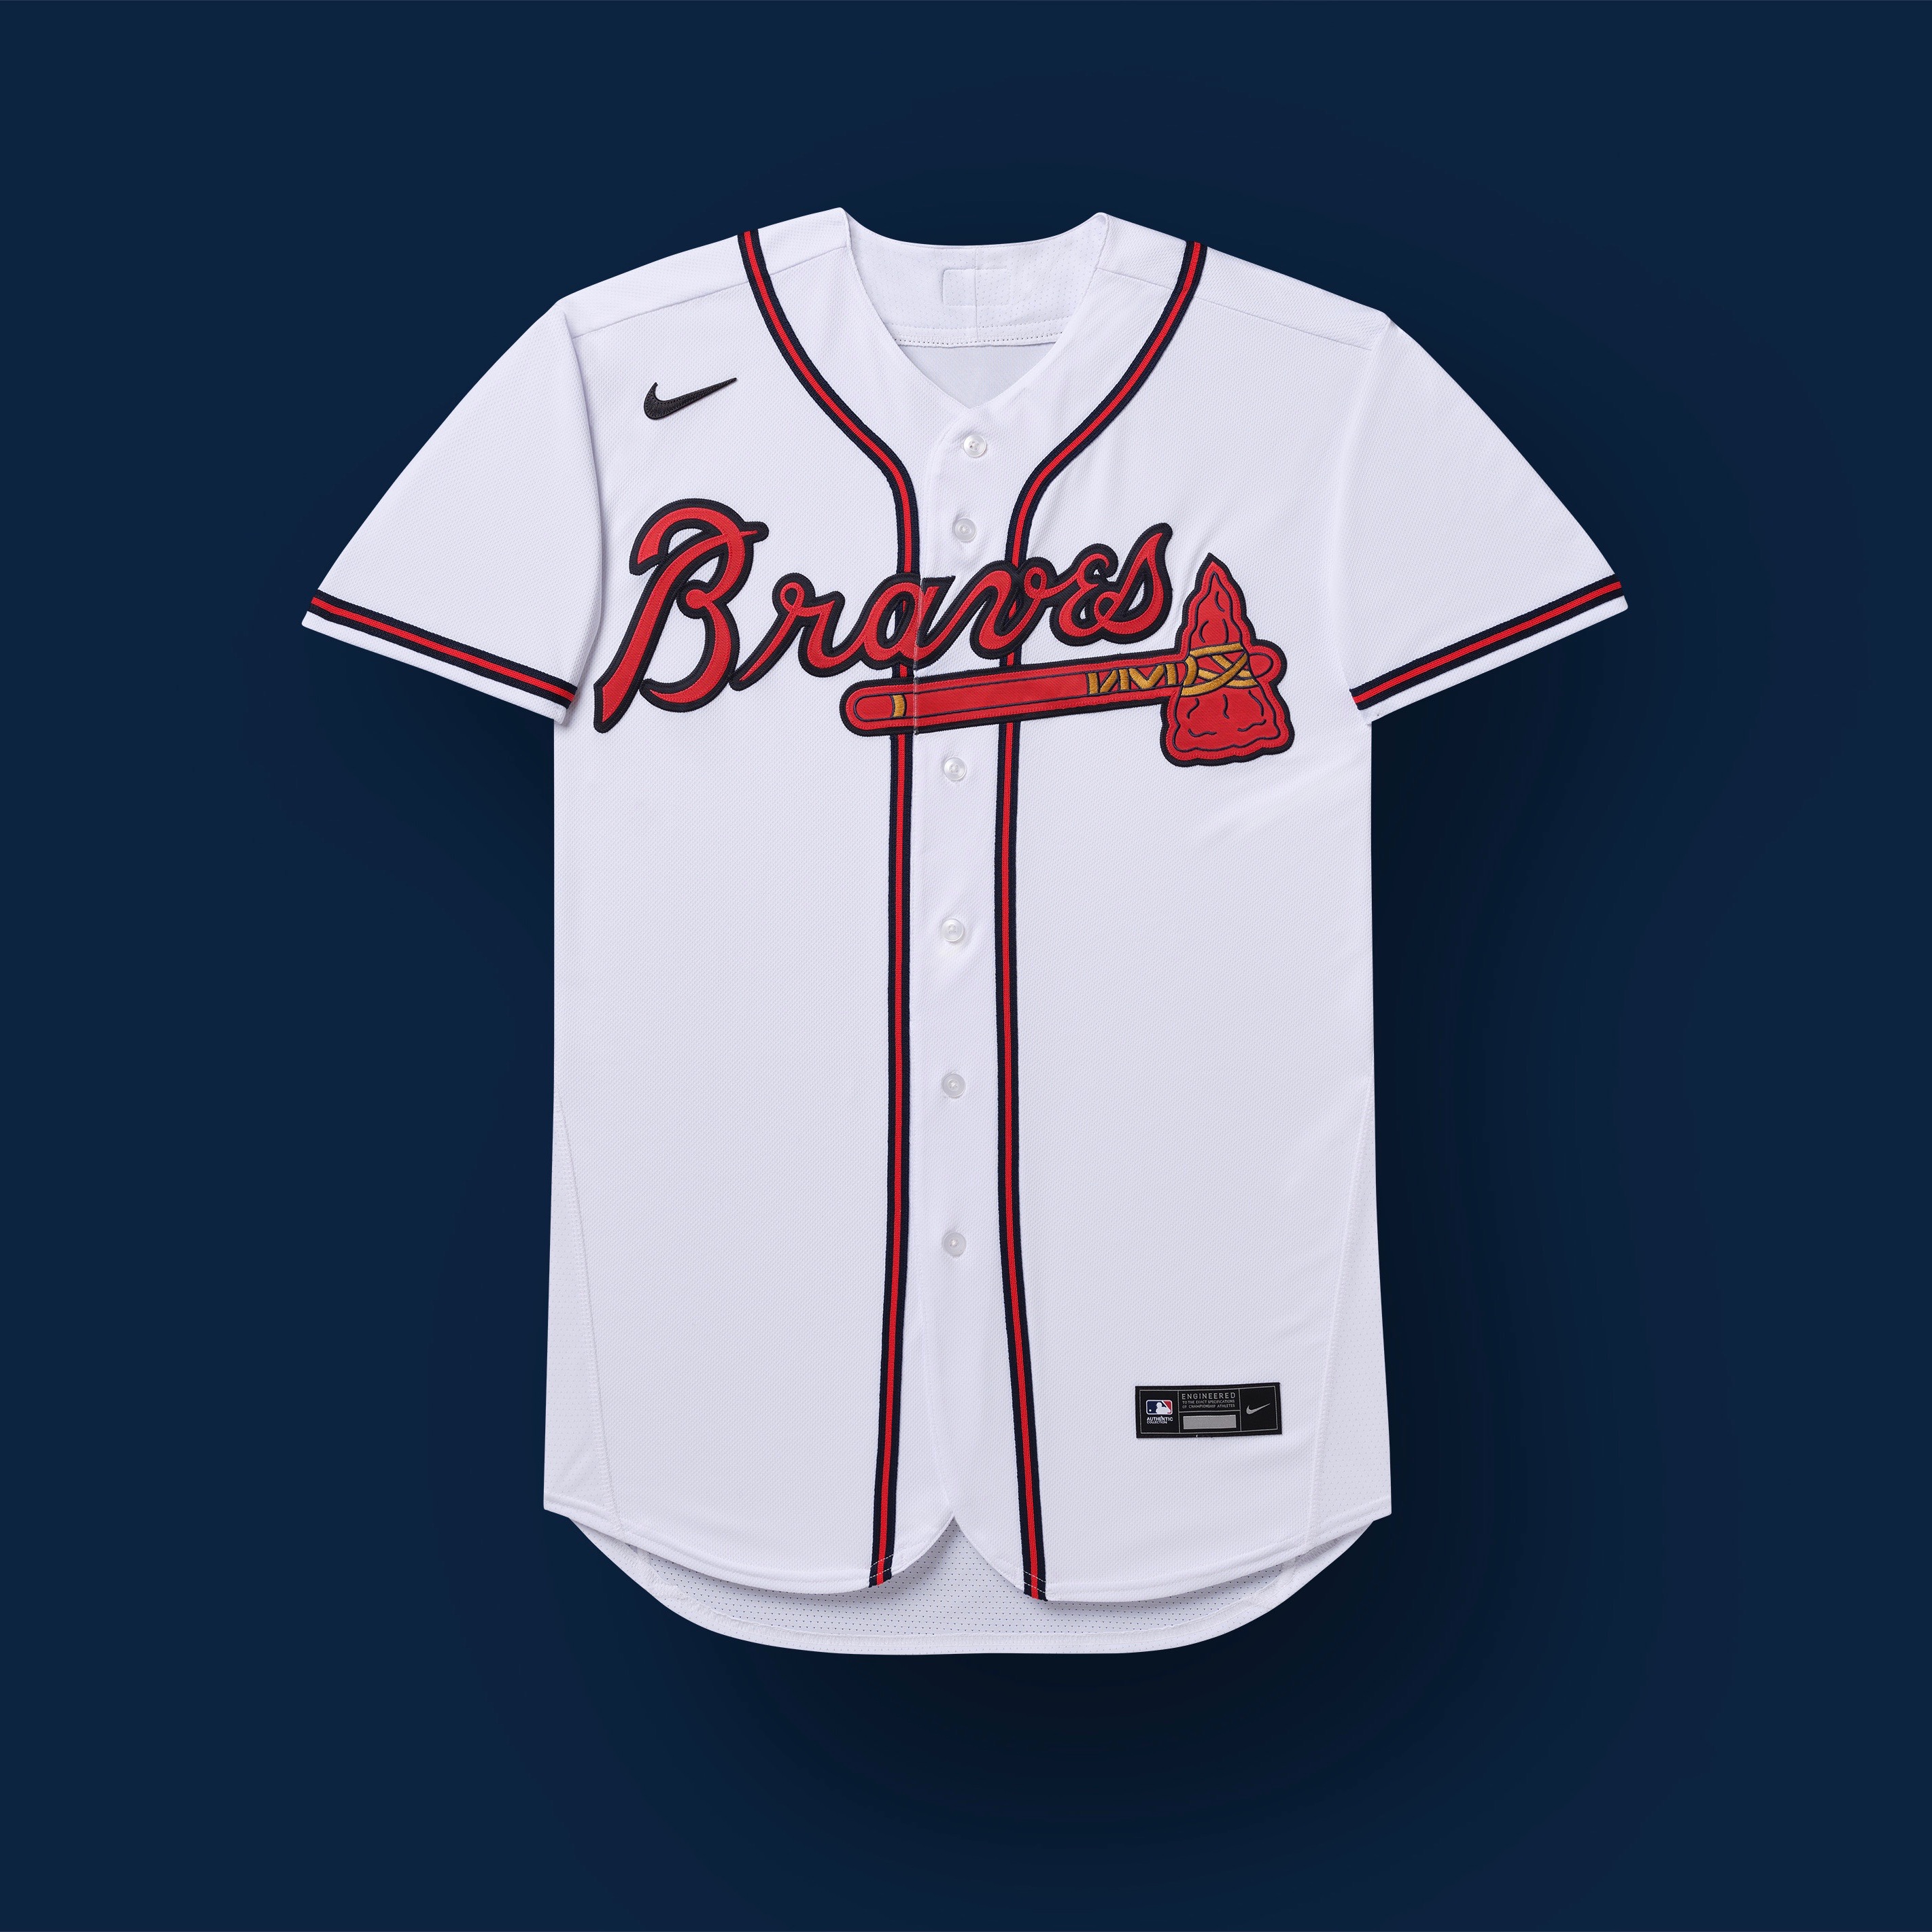 April 09, 2022: The Atlanta Braves logo outlined in gold on the jersey in  dedication to the 2021 World Series Championship during a MLB game against  the Cincinnati Reds at Truist Park